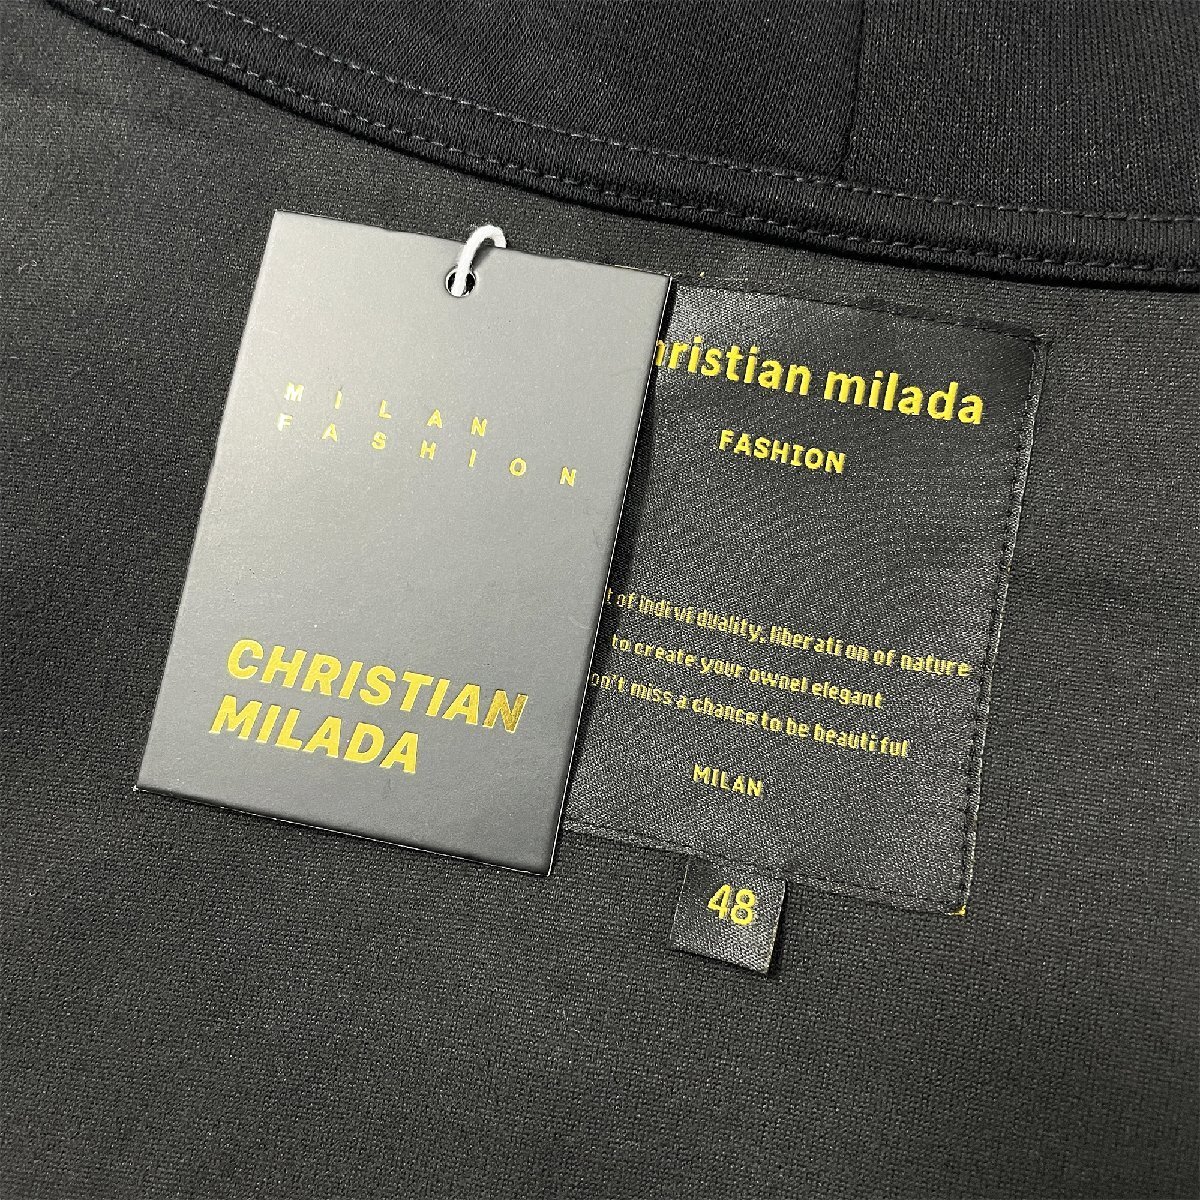  regular price 4 ten thousand *christian milada* milano departure * Parker * high grade comfortable easy dressing up piece . bear colorful britain character pattern tops casual L/48